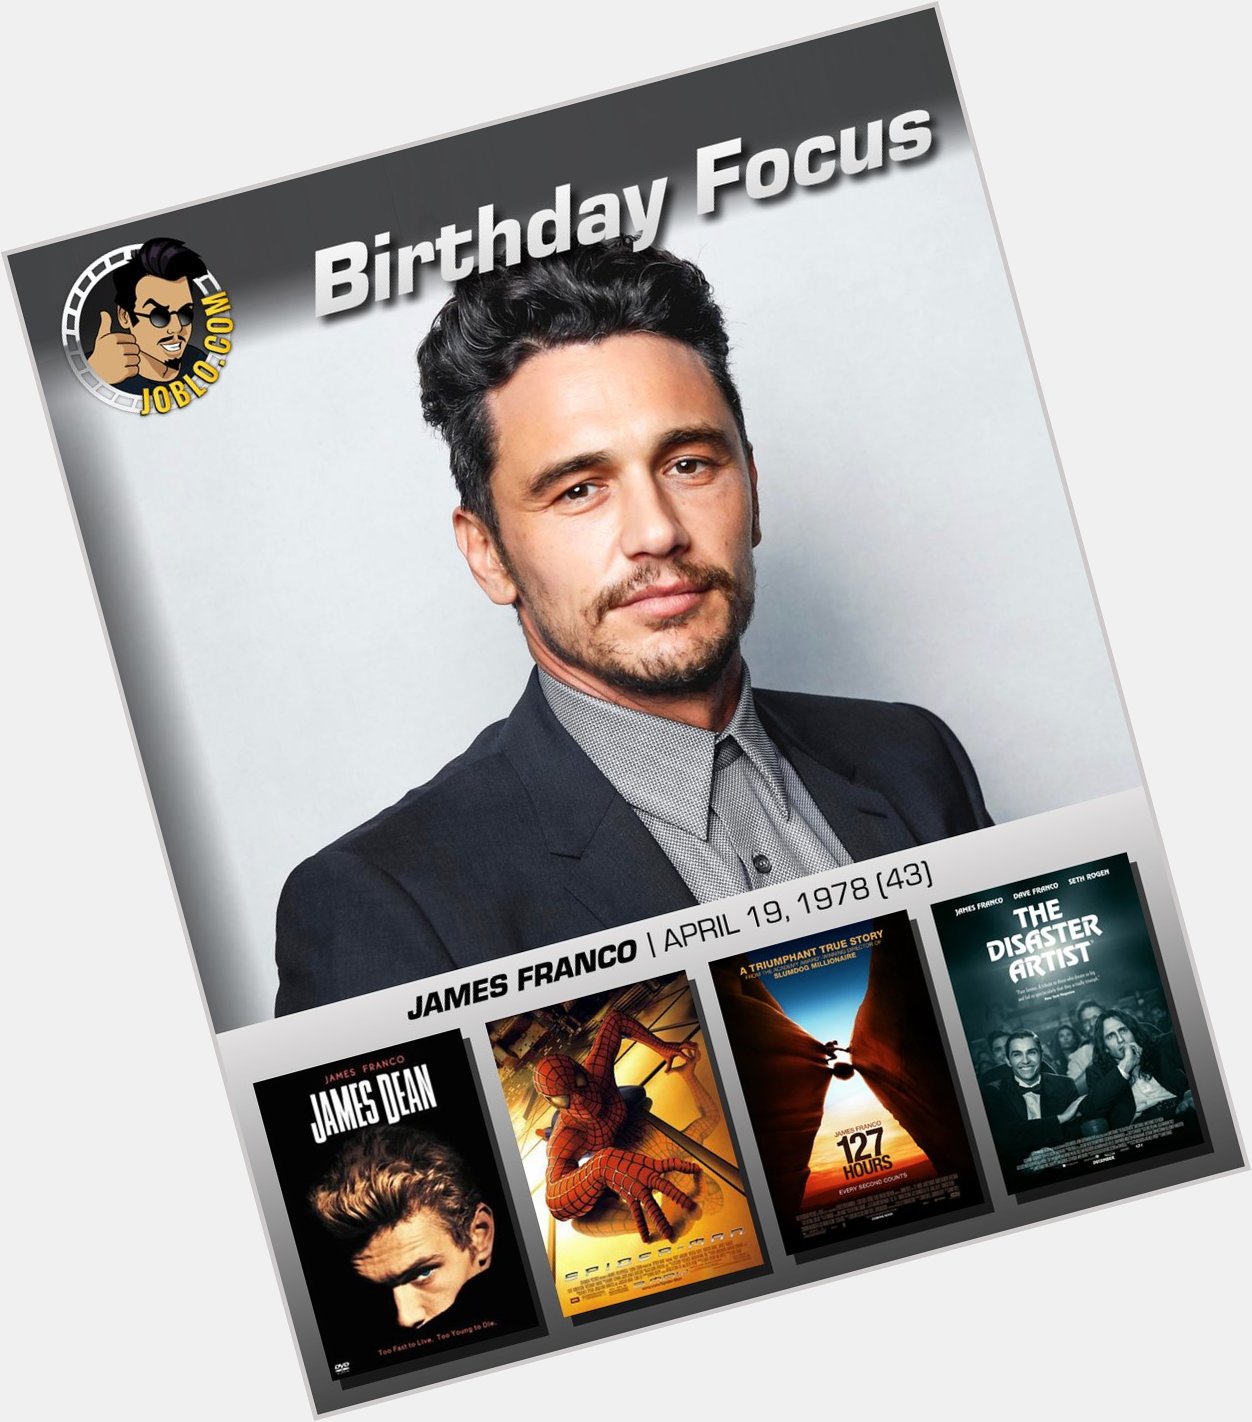 Wishing James Franco a very happy 43rd birthday!
What\s your favorite performance of his? 